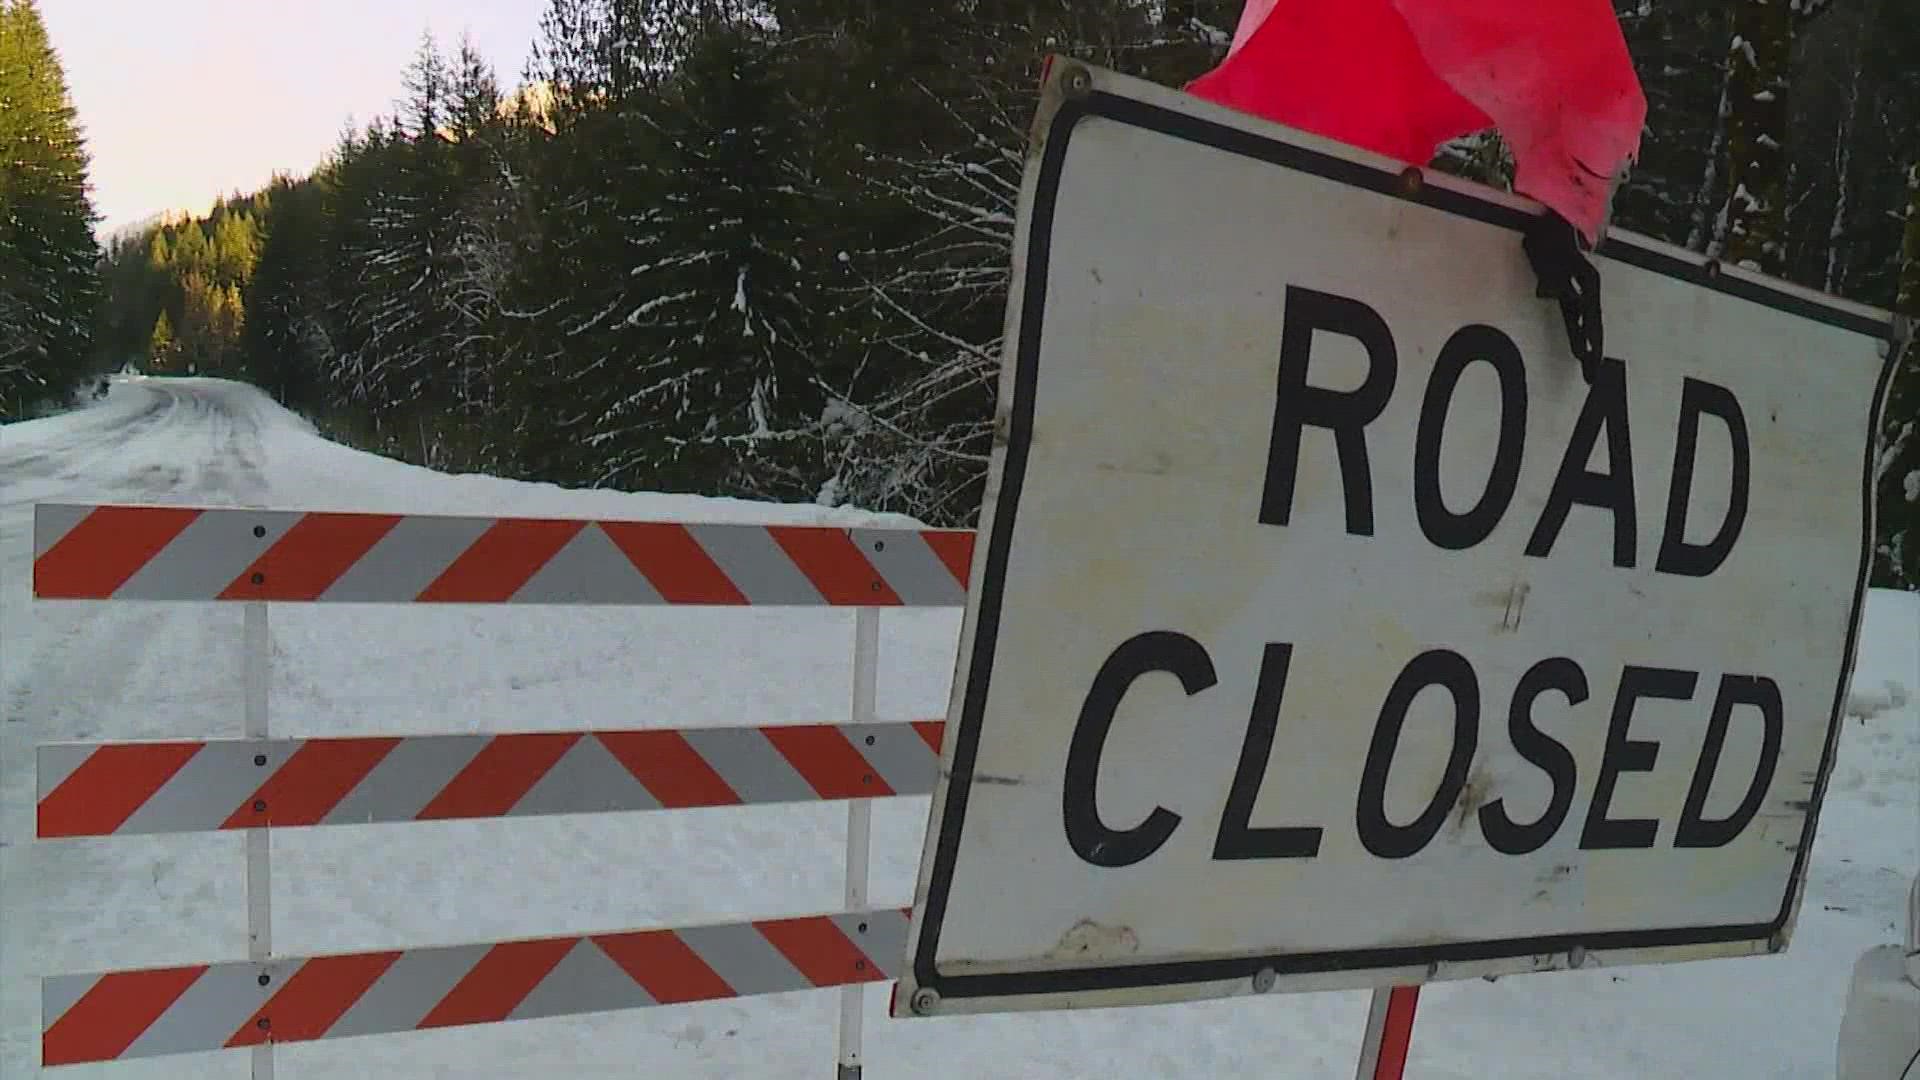 Stevens and White passes remained closed Tuesday morning after closing last week due to heavy snowfall and dangerous conditions.